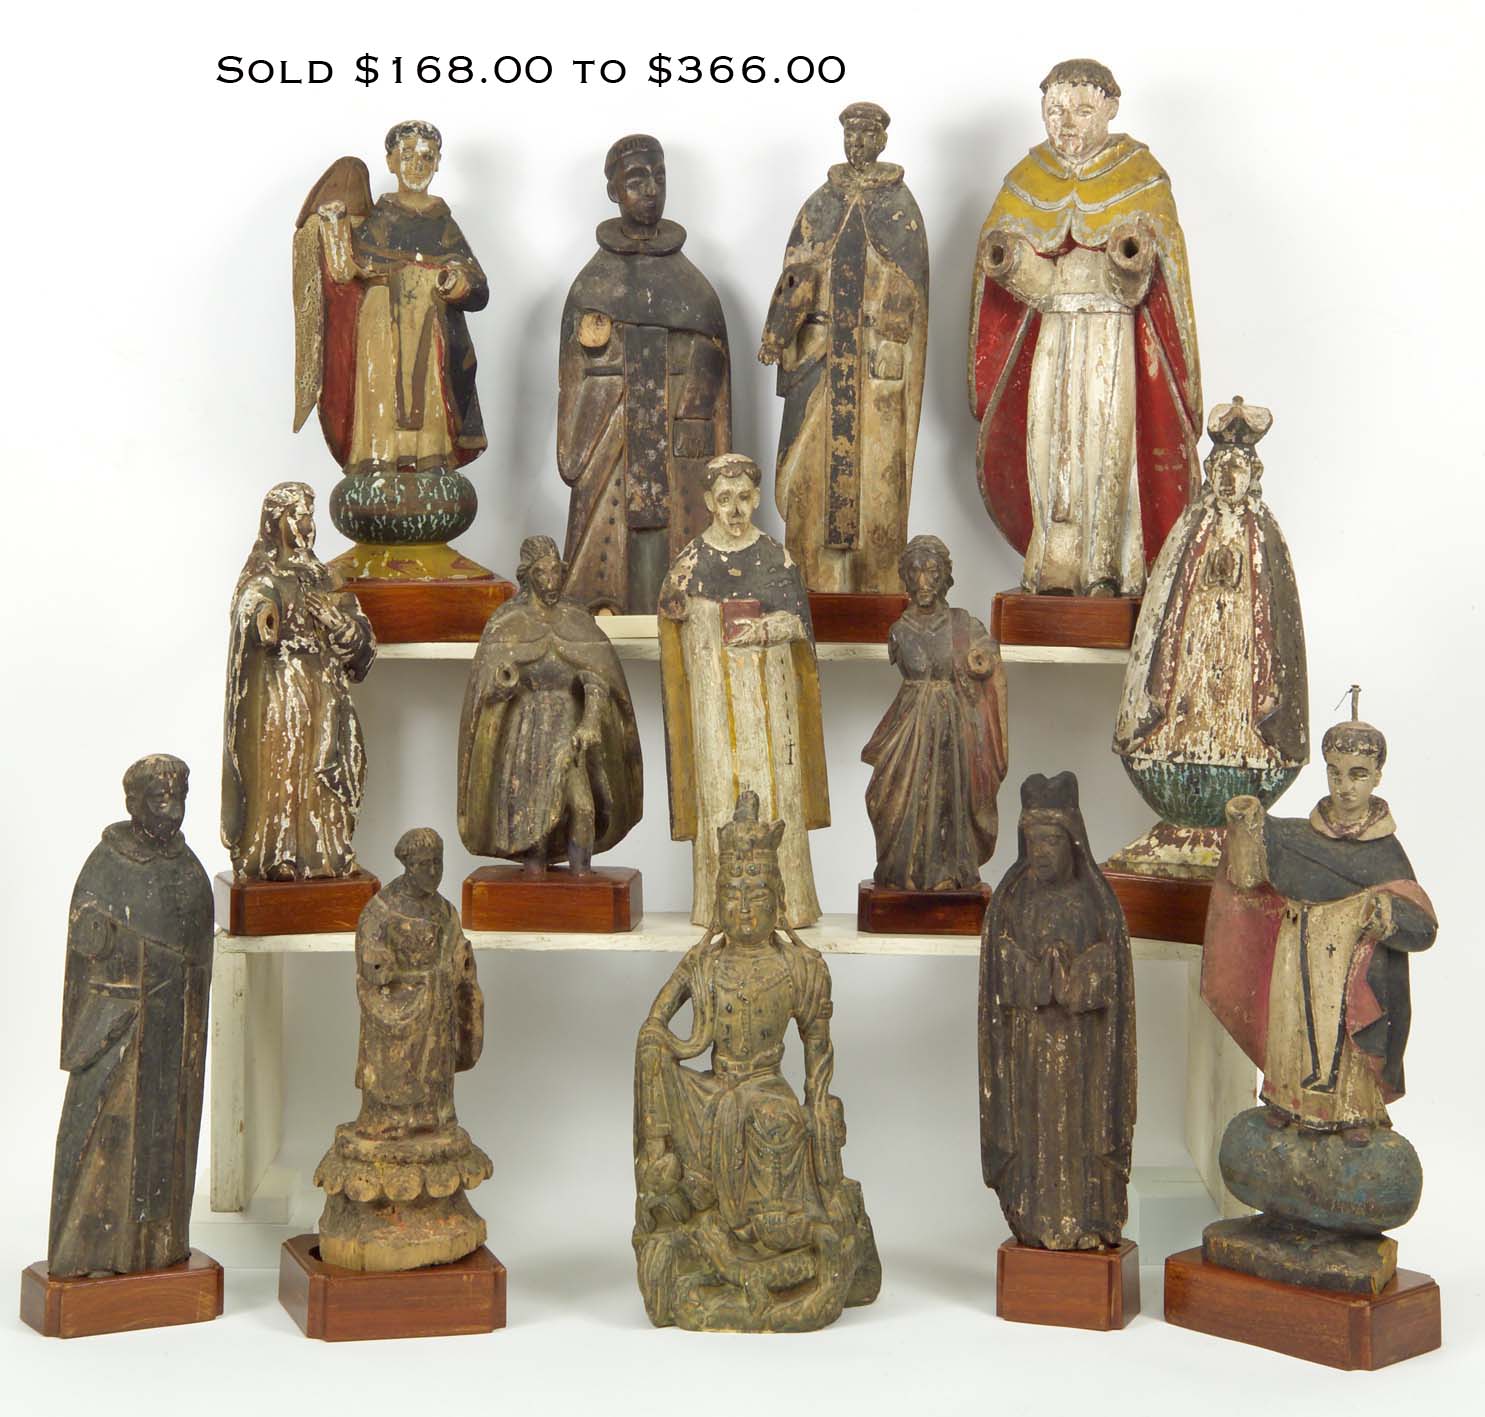 BUSACCA GALLERY - ANTIQUE HAND WOODEN CARVED POLYCHROME SANTO FIGURE